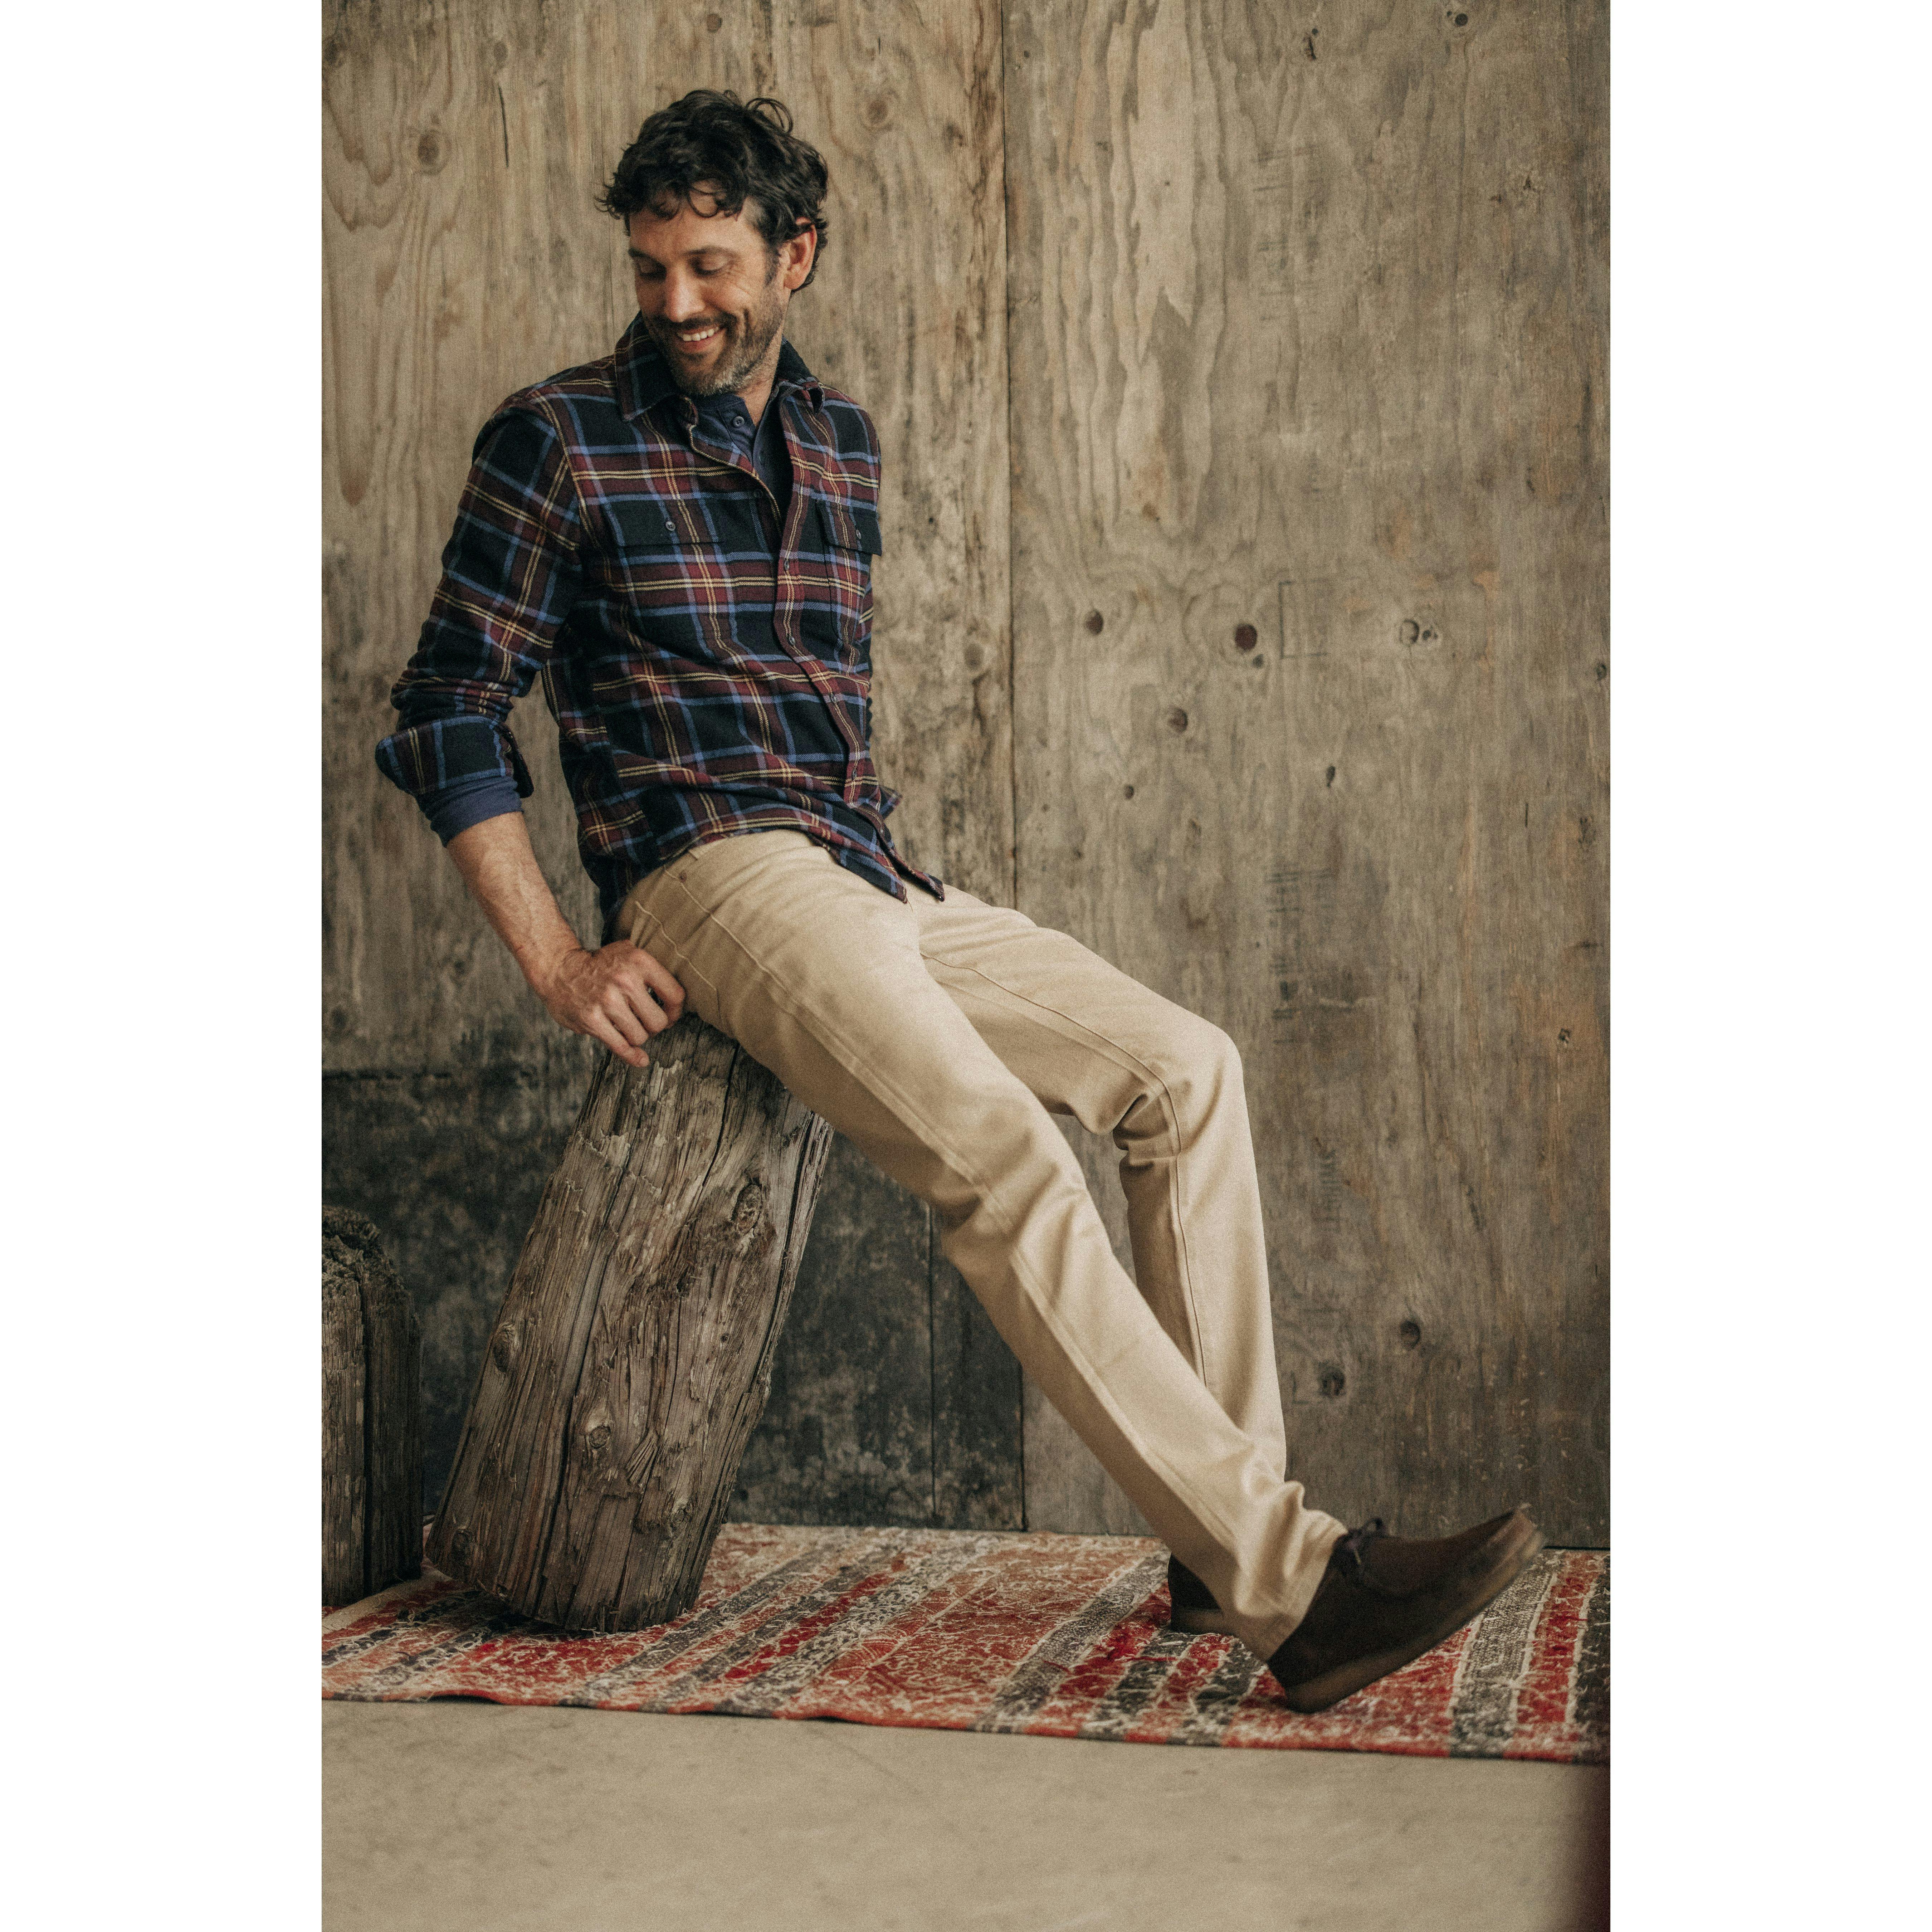 Taylor Stitch - The California in Dune Plaid Brushed Cotton Twill